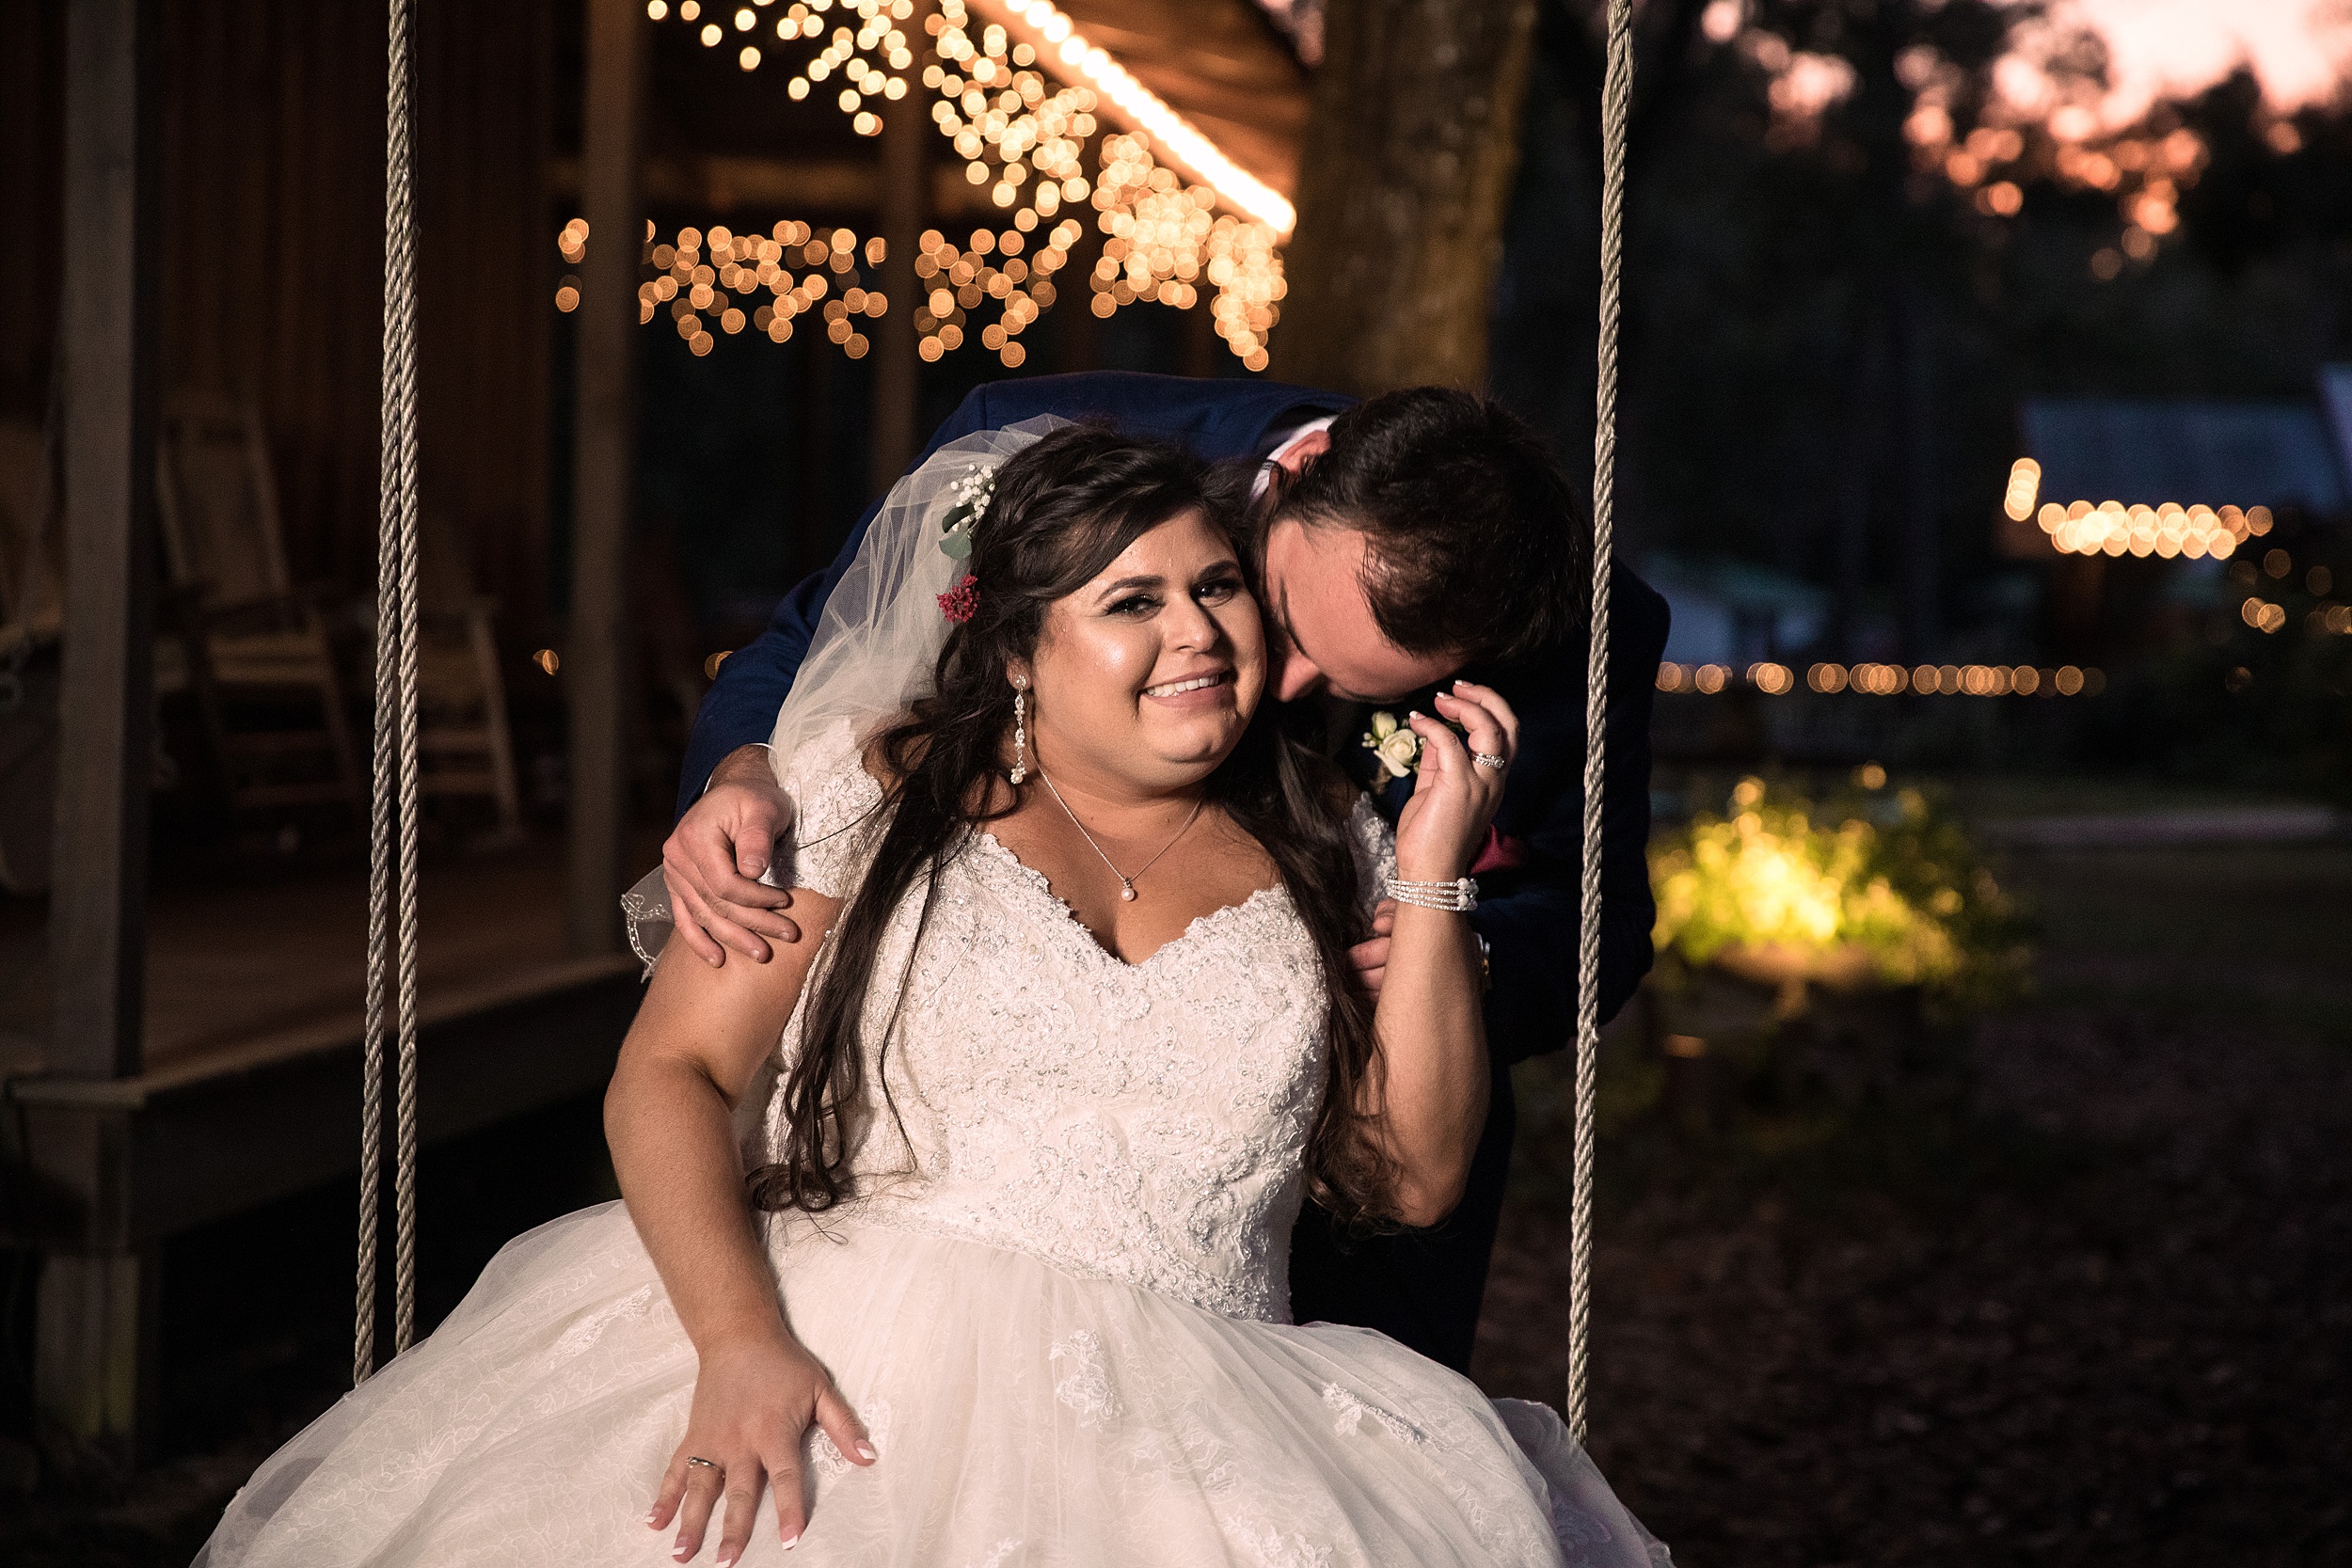 A groom kisses his bride's cheek as she sits on a swing by a porch under market lights